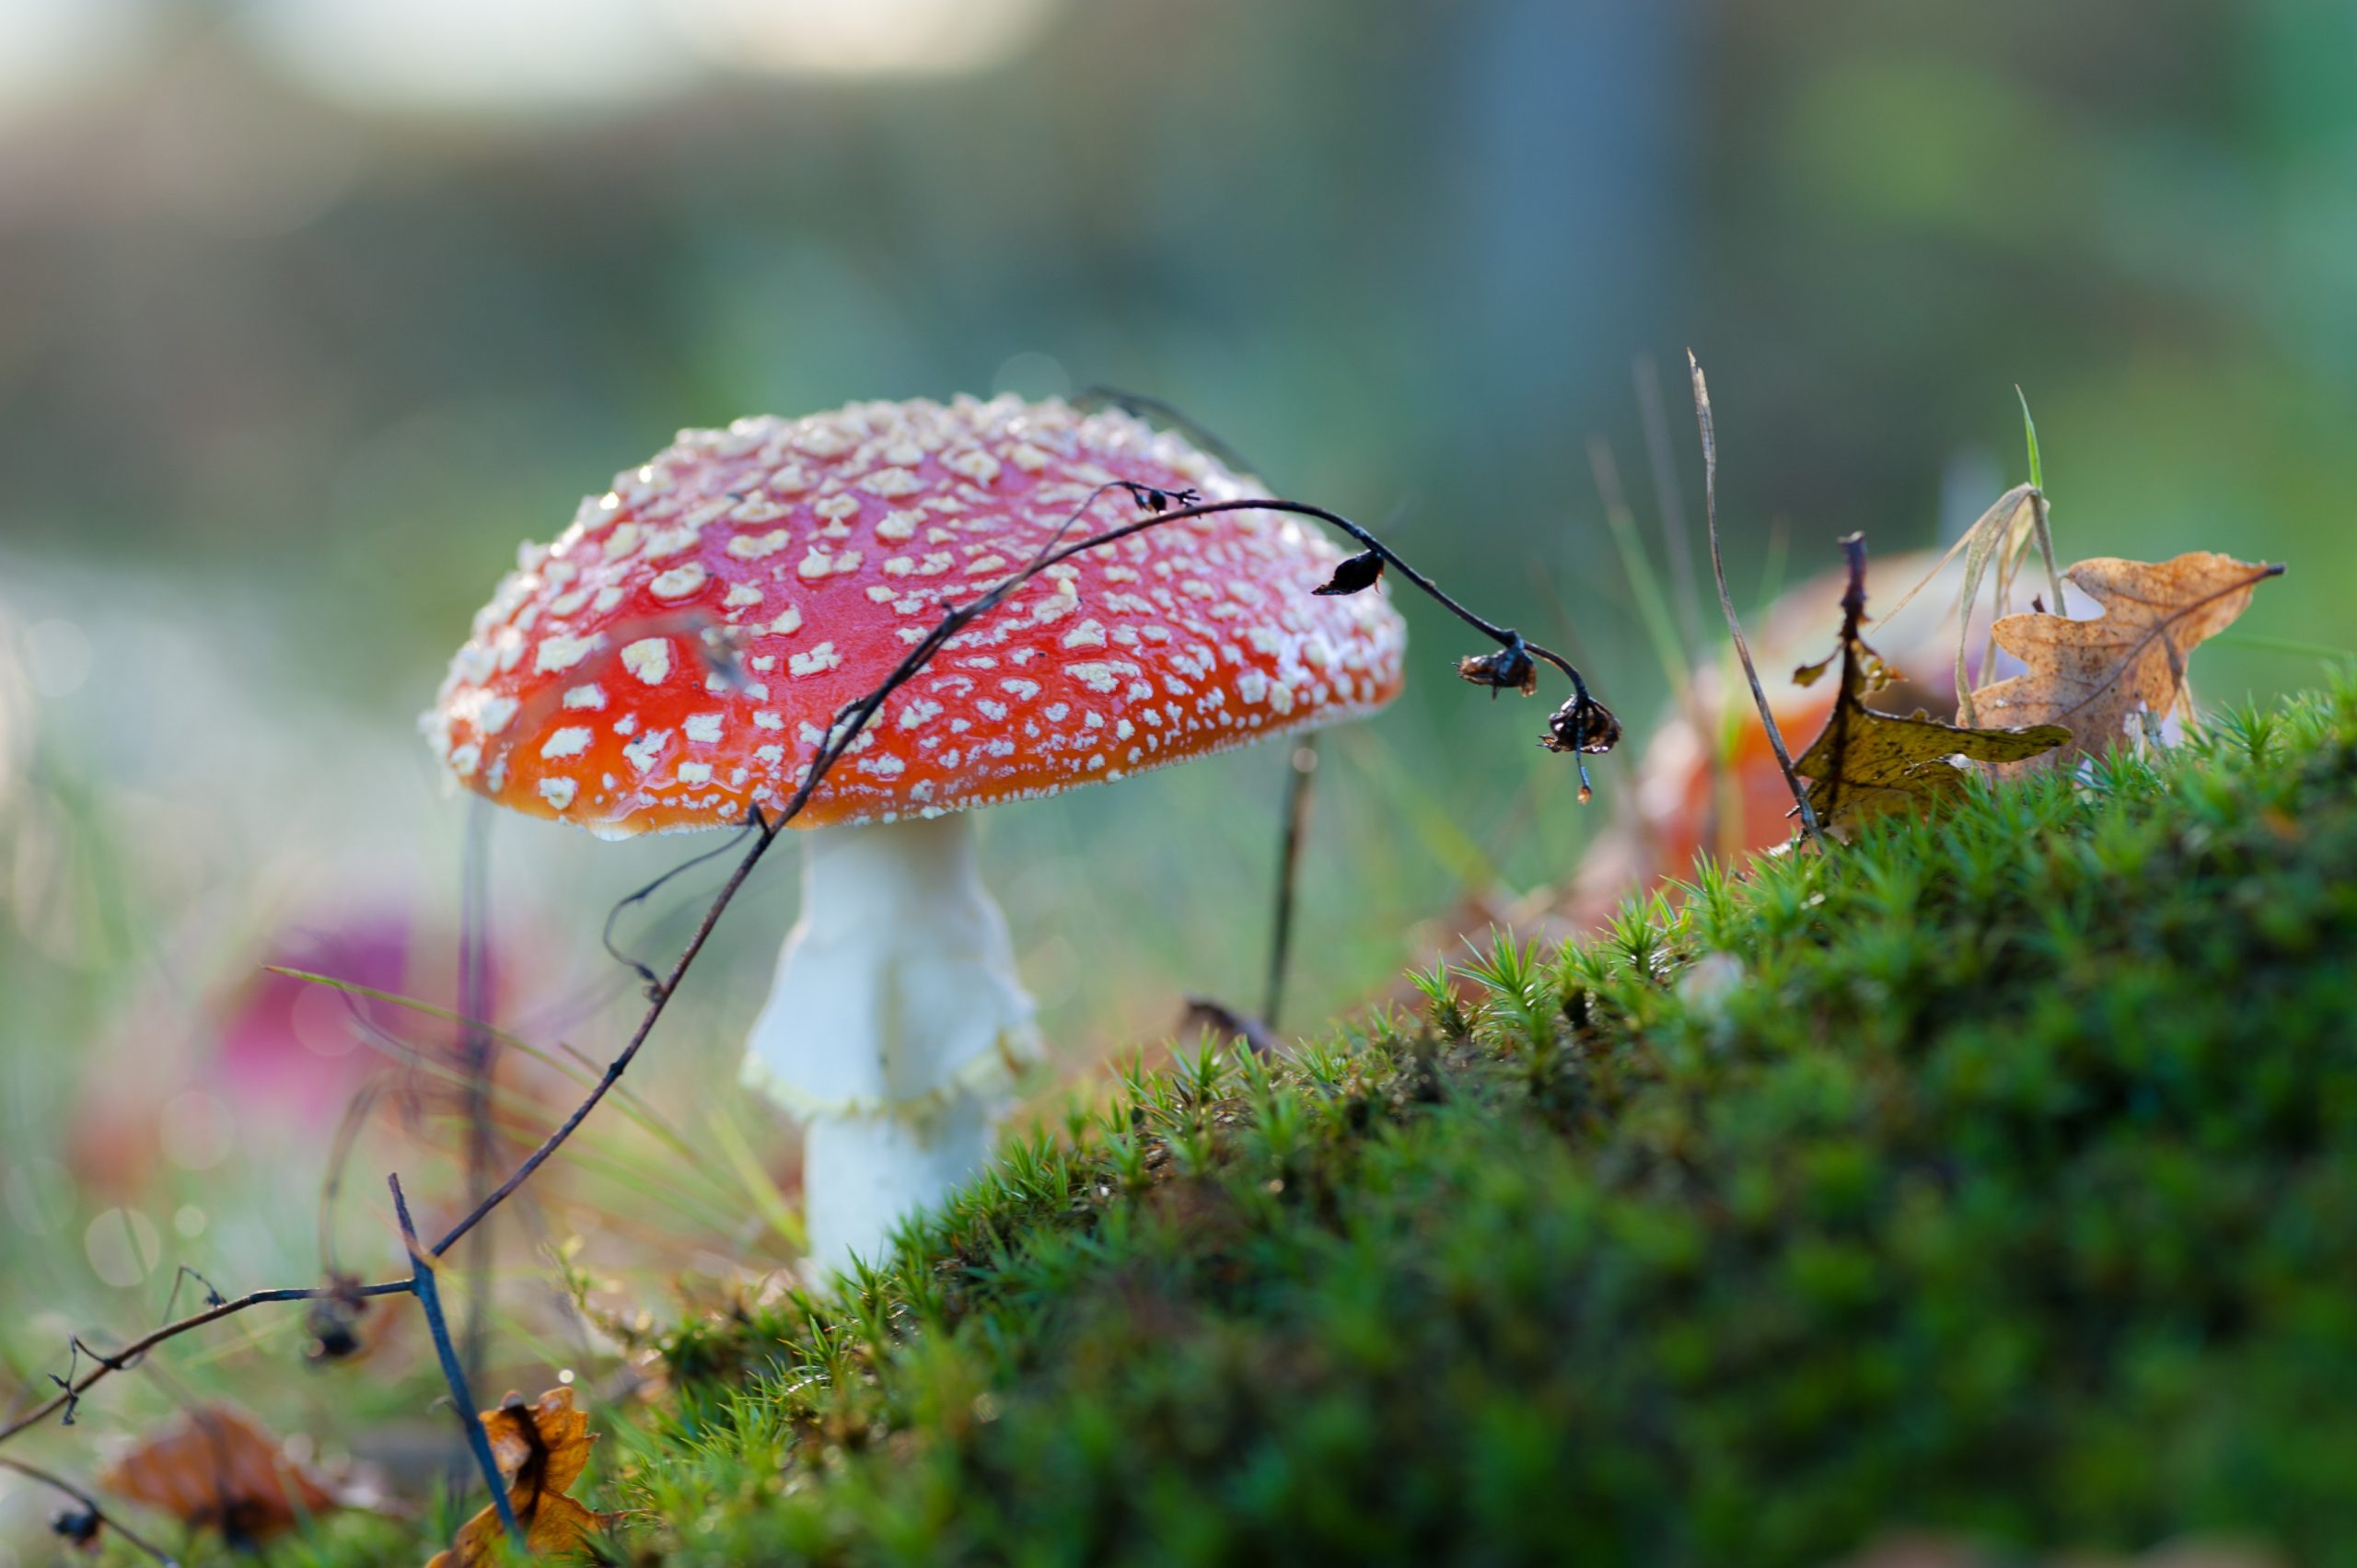 Red poison mushroom in the midground with soft focus moss in the foreground